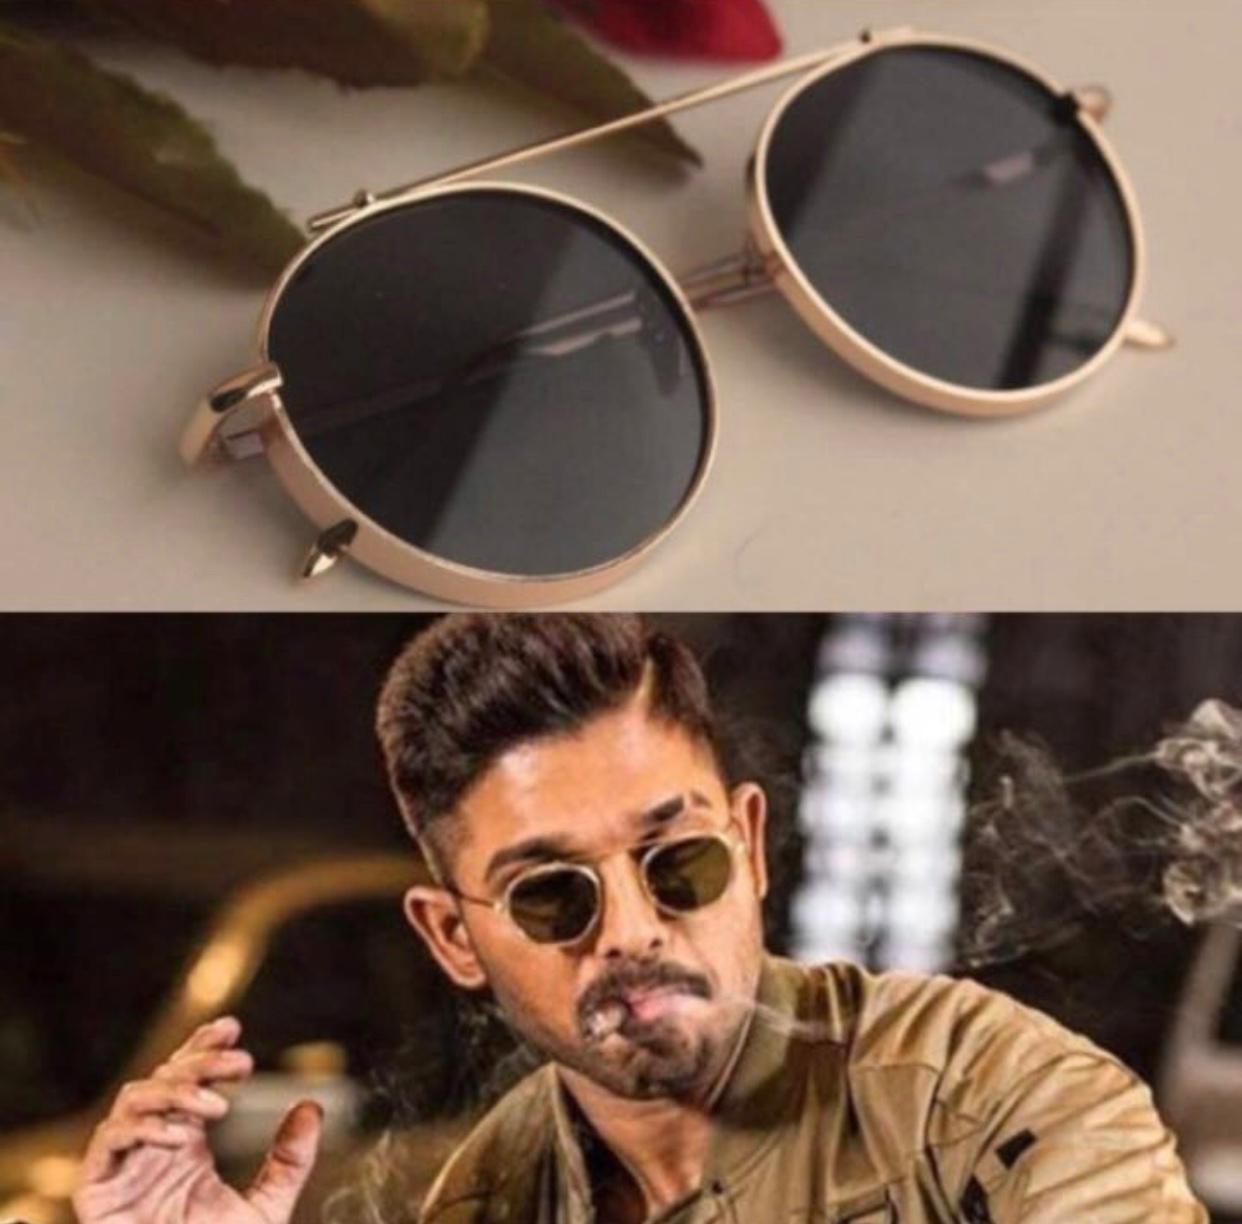 Most Stylish Metal Frame Round Sunglasses For Men And Women-JackMarc - JACKMARC.COM